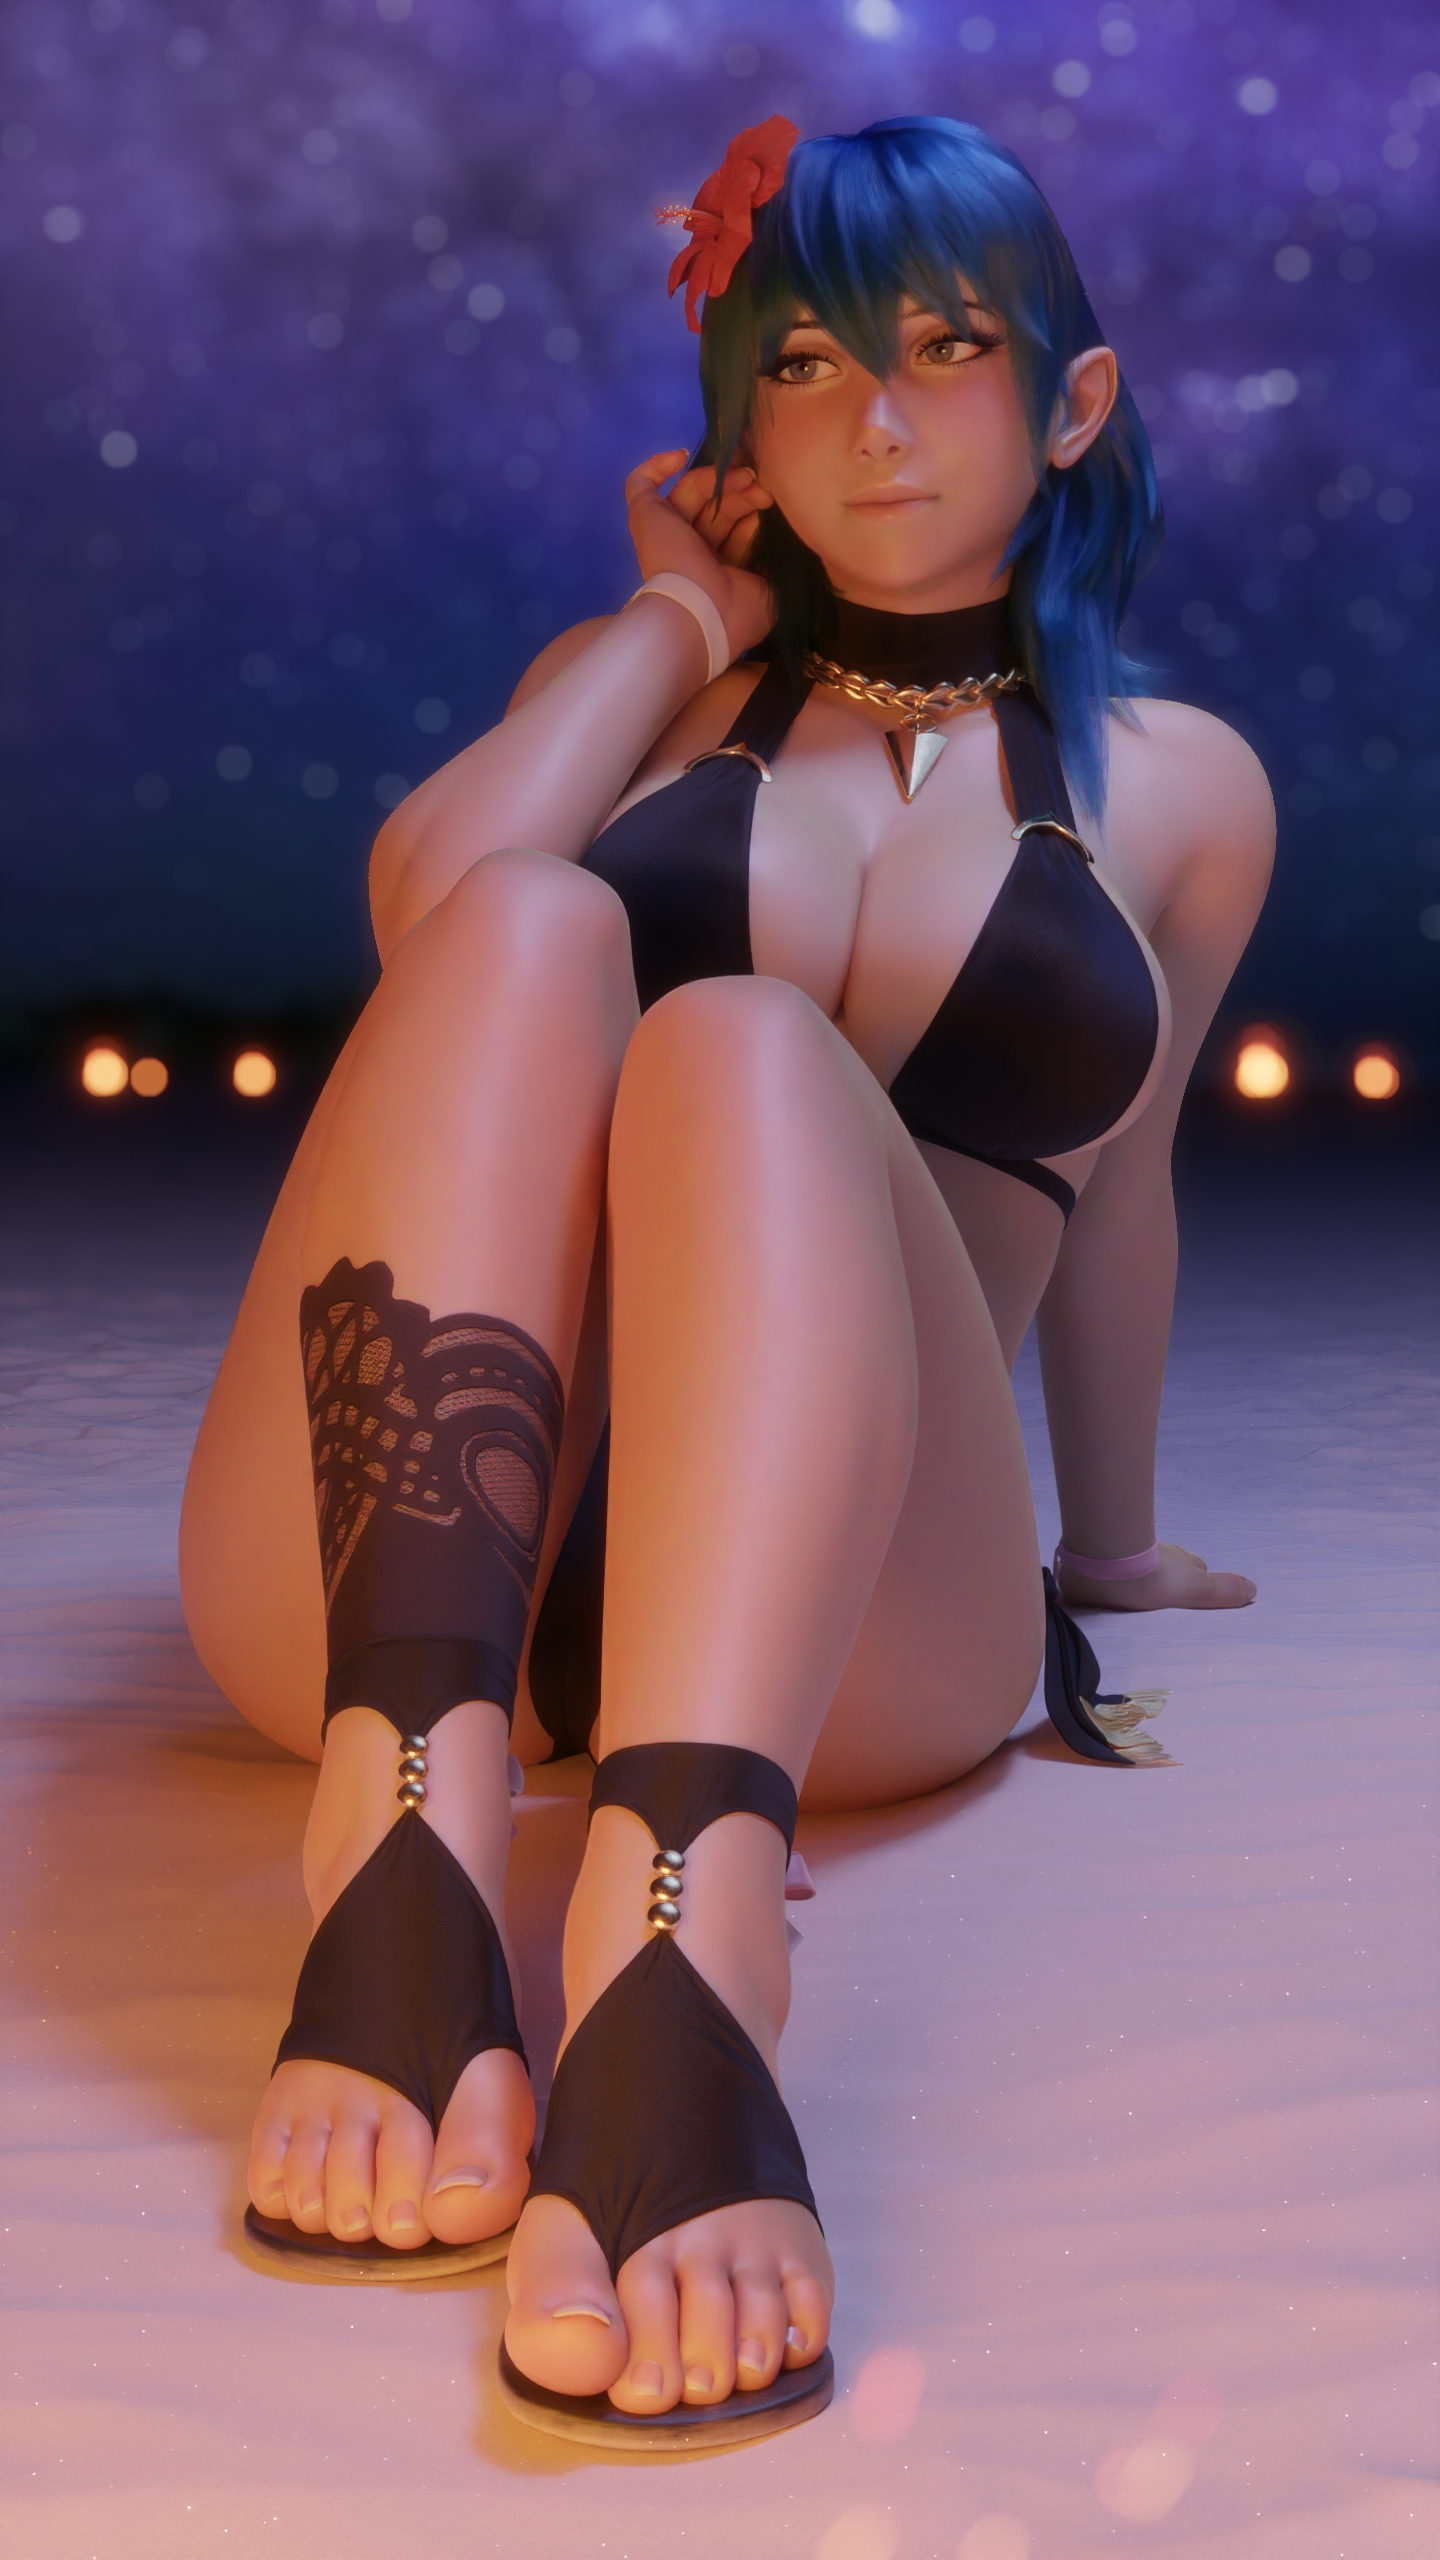 Byleth in bikini pose Byleth Fire Emblem Boobs Cleavage Sexy Hot Bikini Lingerie Naked Half Naked 3d Porn